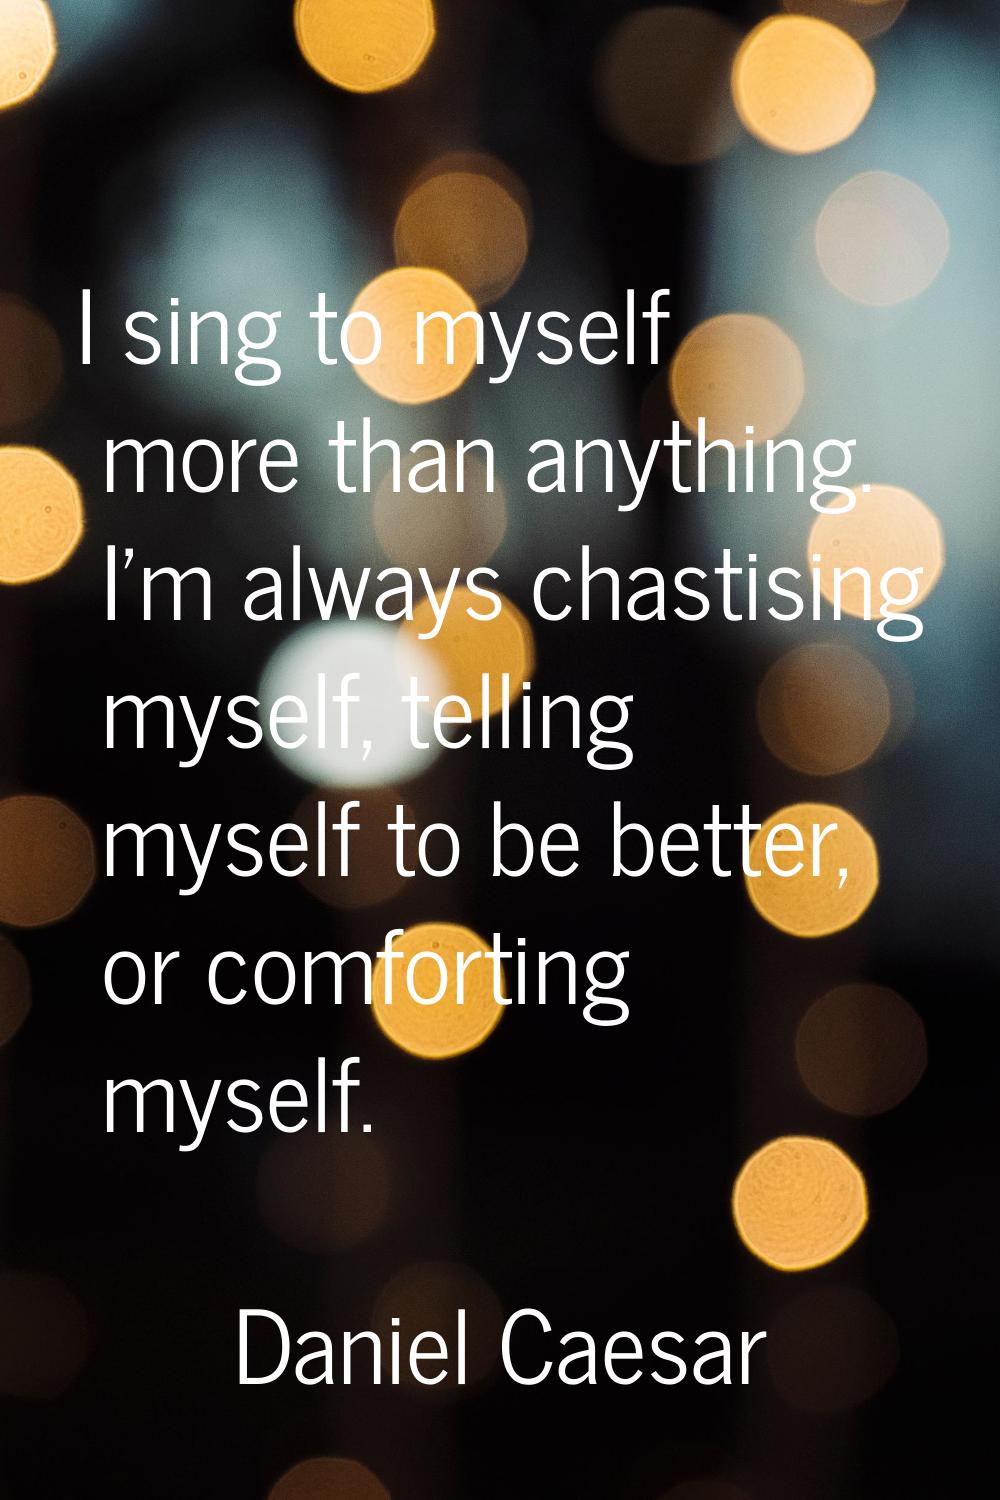 I sing to myself more than anything. I’m always chastising myself, telling myself to be better, or 